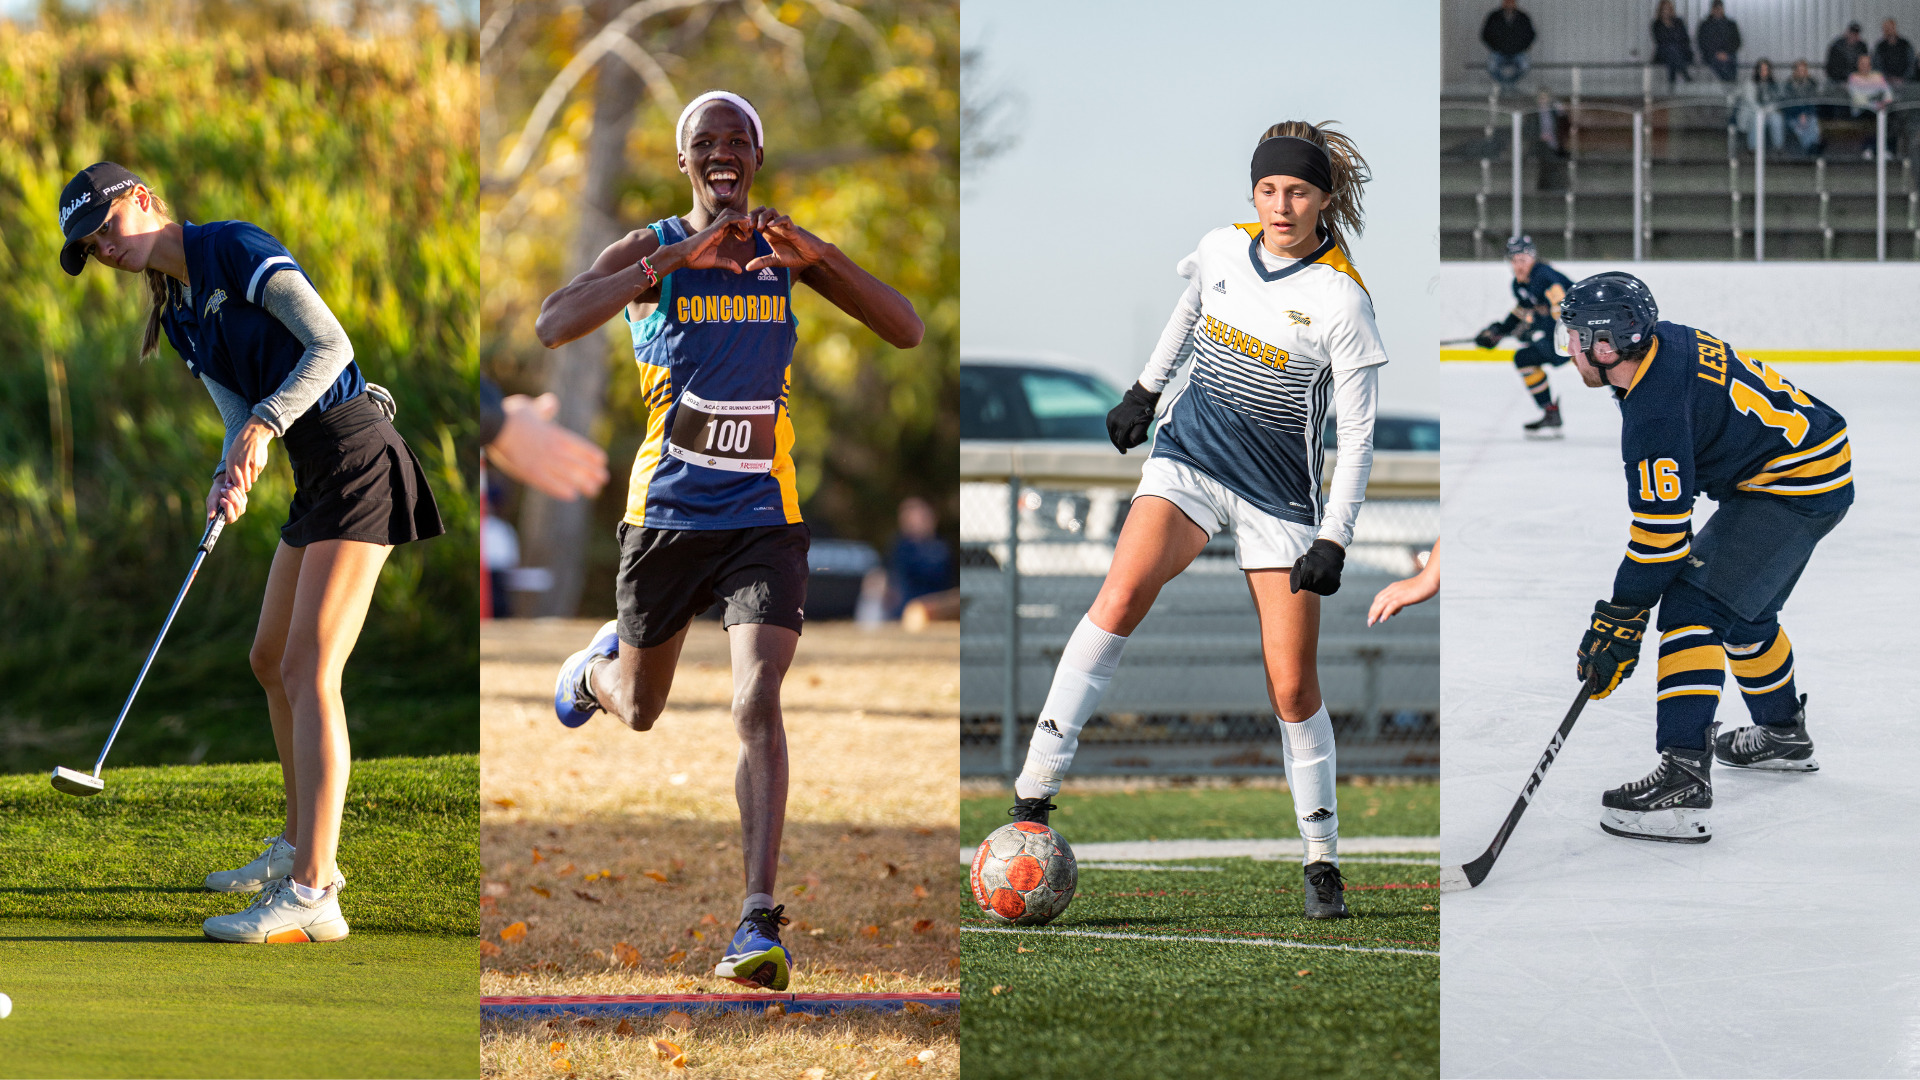 Thunder Athletics - Fall 2022 Semester in Review